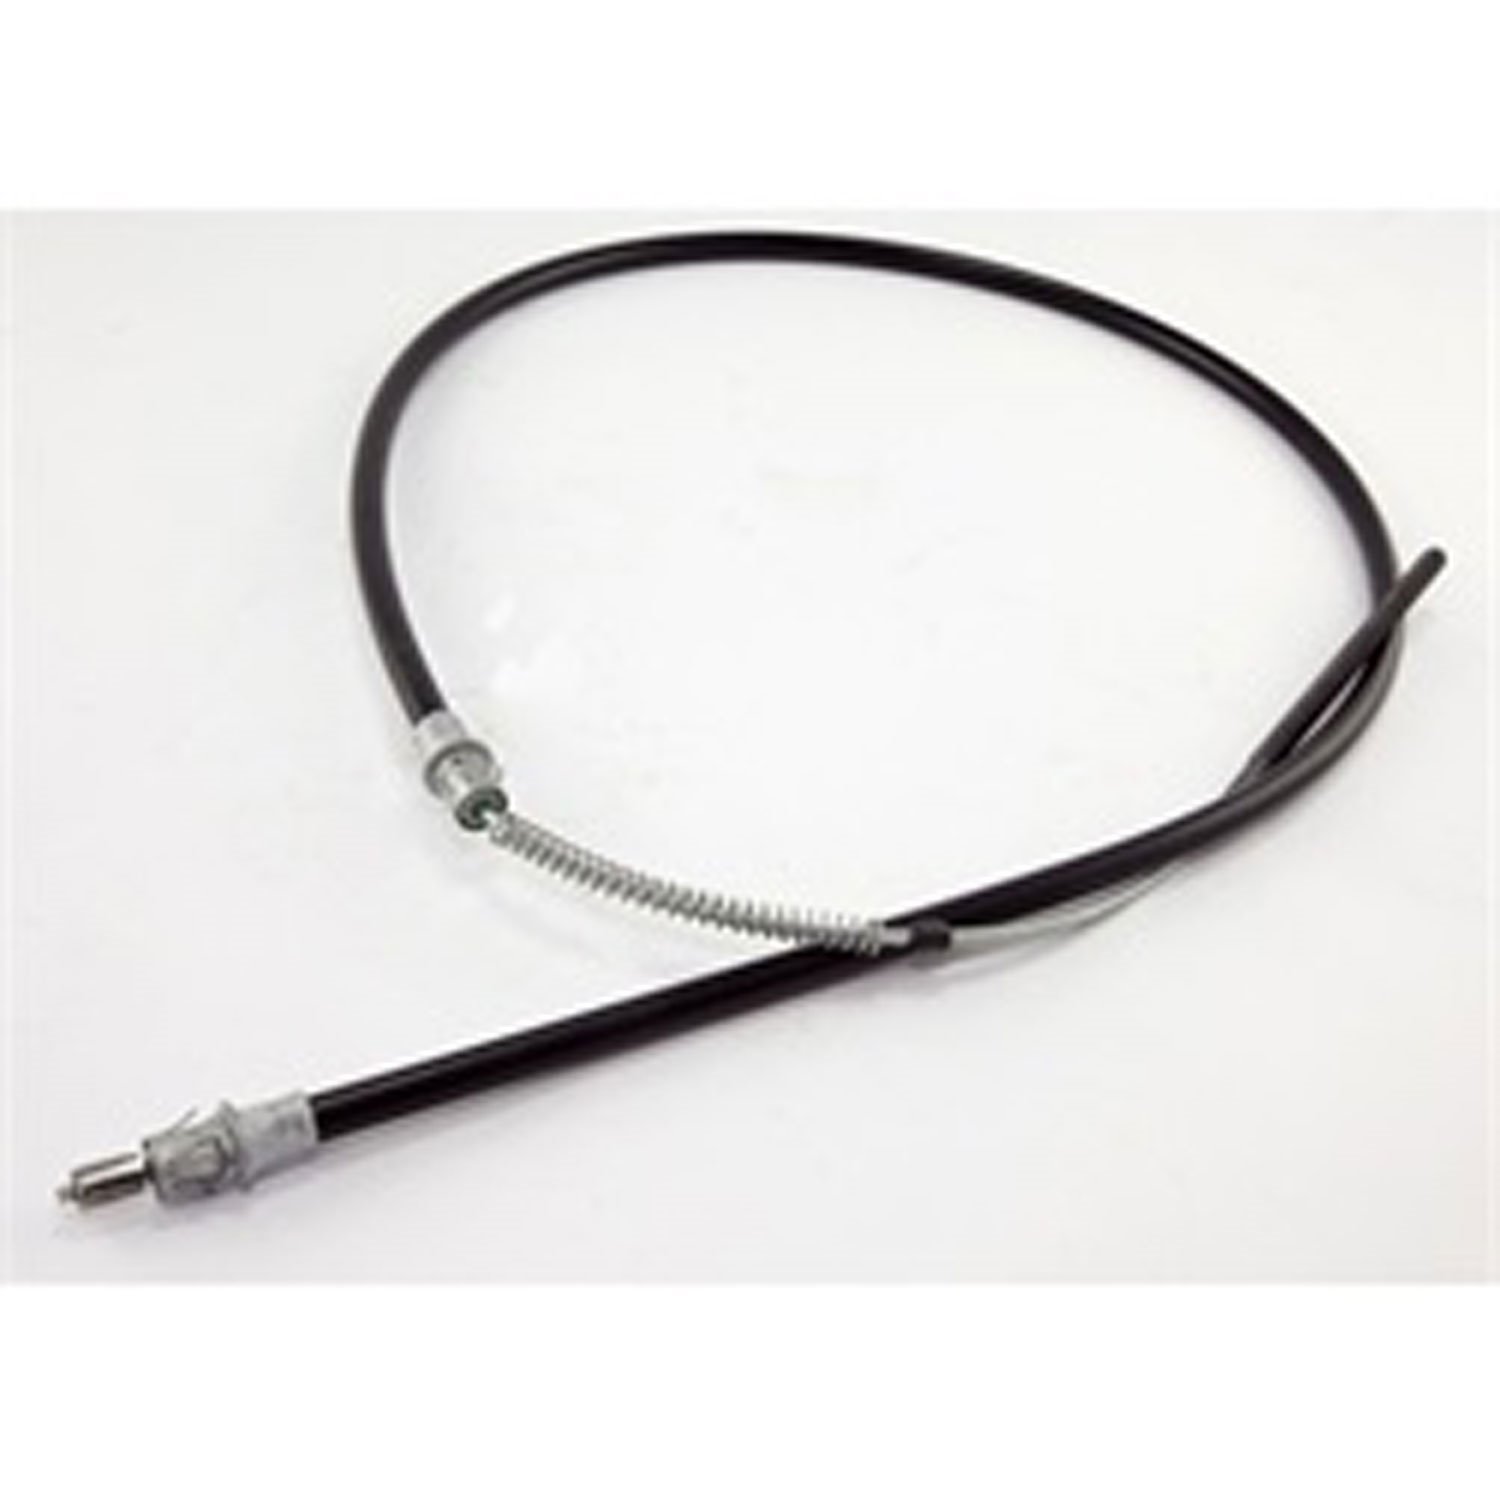 This front parking brake cable from Omix-ADA connects the parking brake pedal to the equalizer on 1987-1990 Jeep Wranglers.